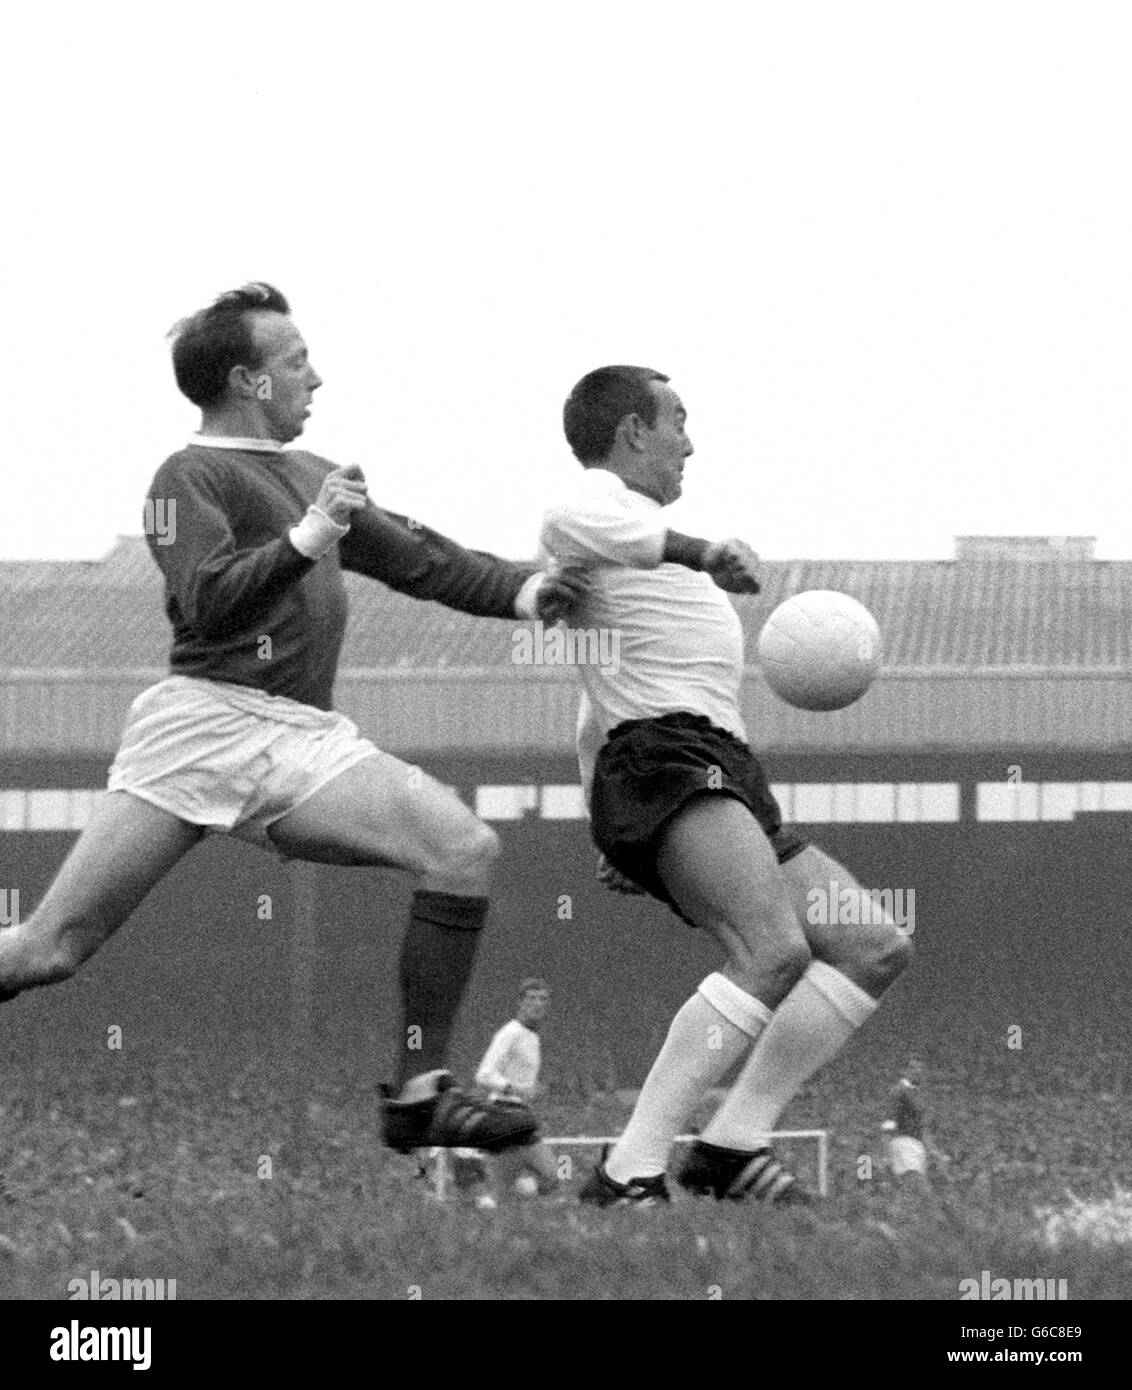 Manchester United wing-half Nobby Stiles (left) appears to be giving a helping shove to Liverpool centre-forward Ian St. John as he races across to clear the ball from danger near the United goalmouth during the match in Manchester. Stock Photo